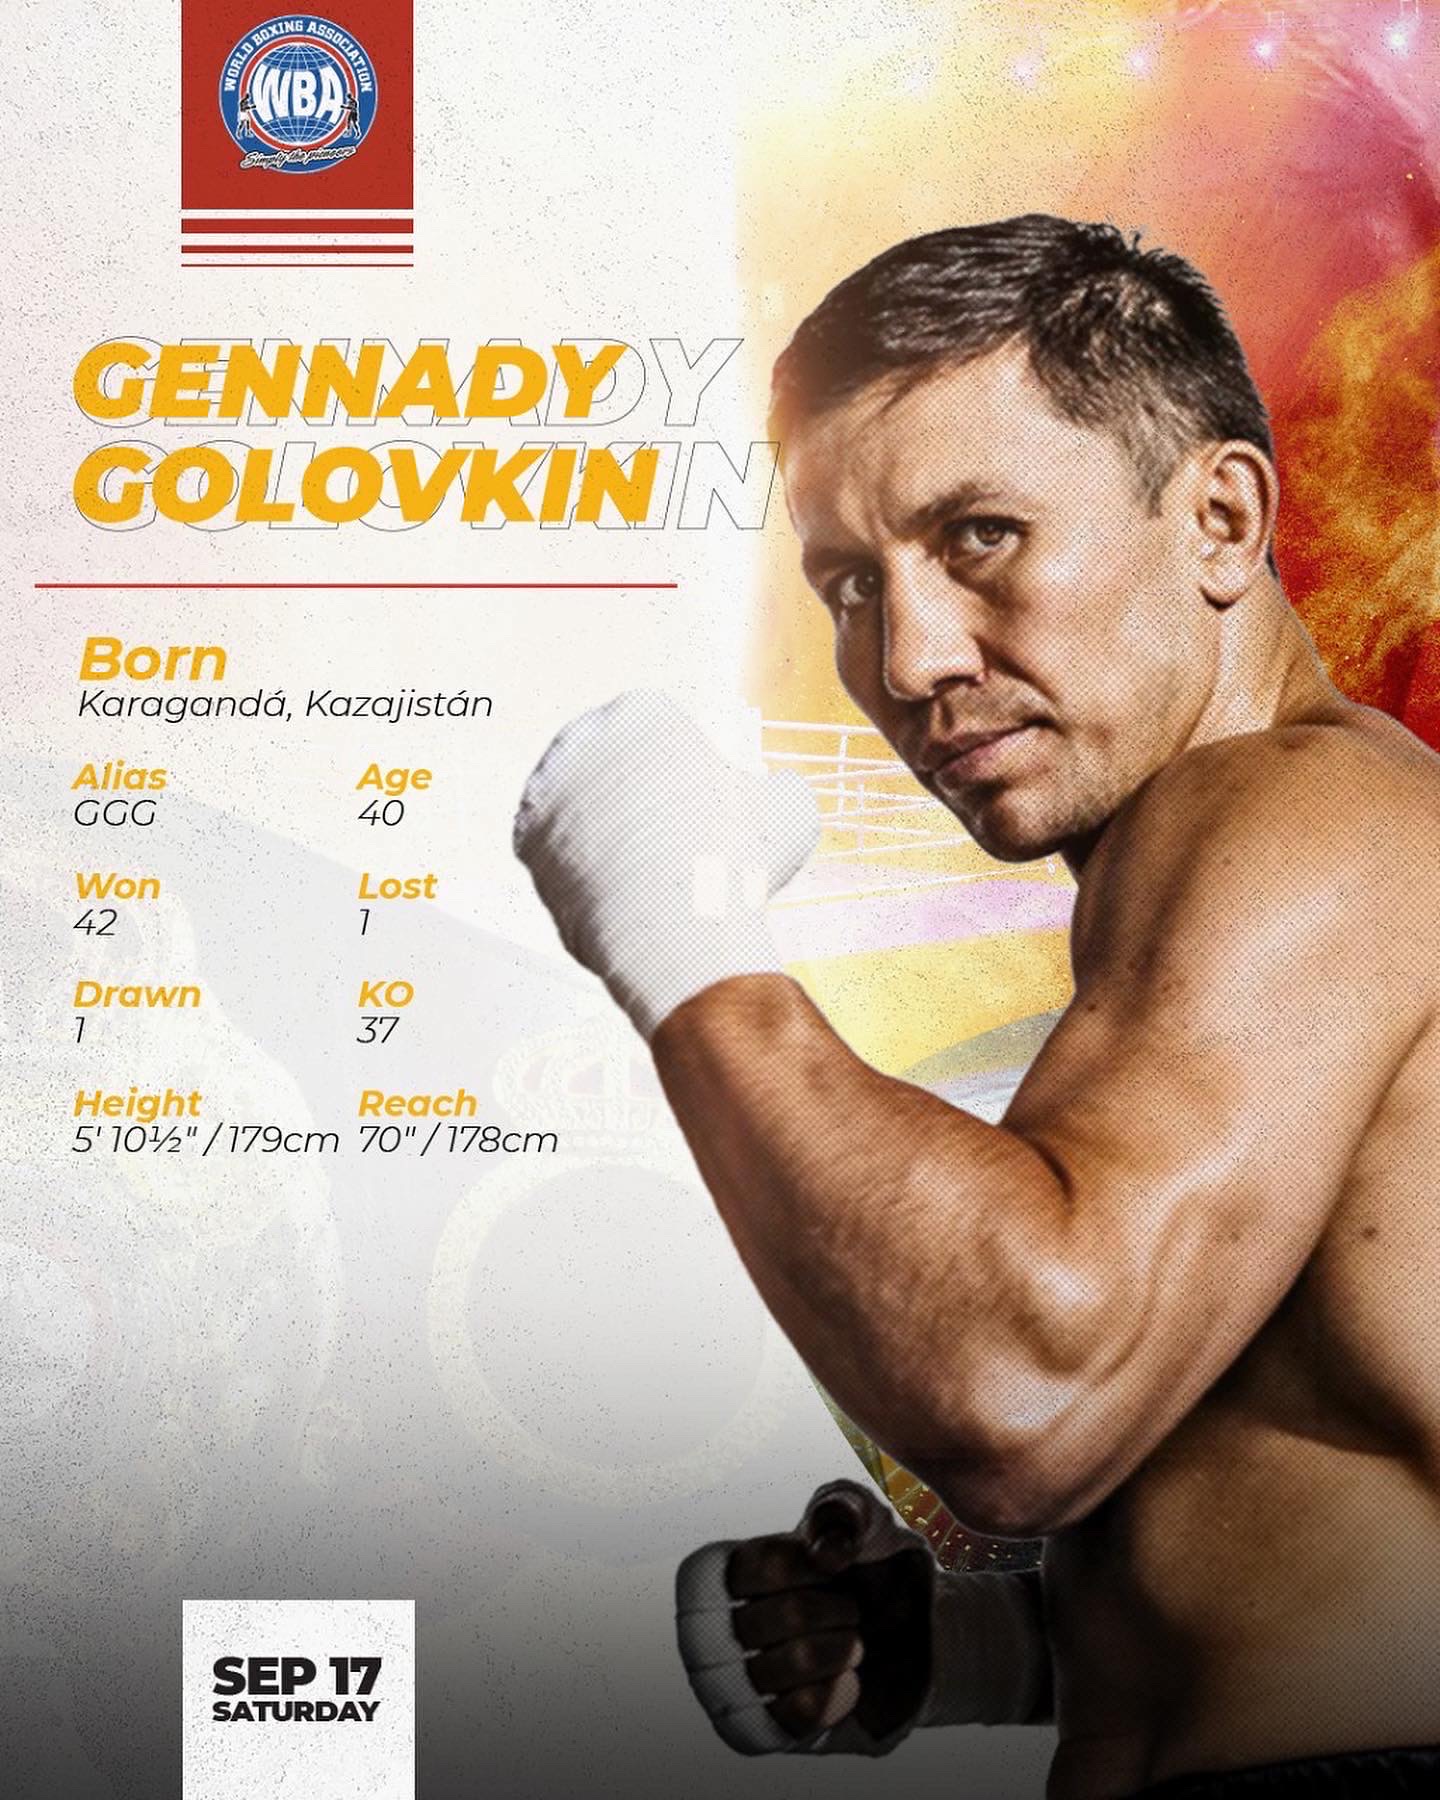 GGG: the victory he is missing